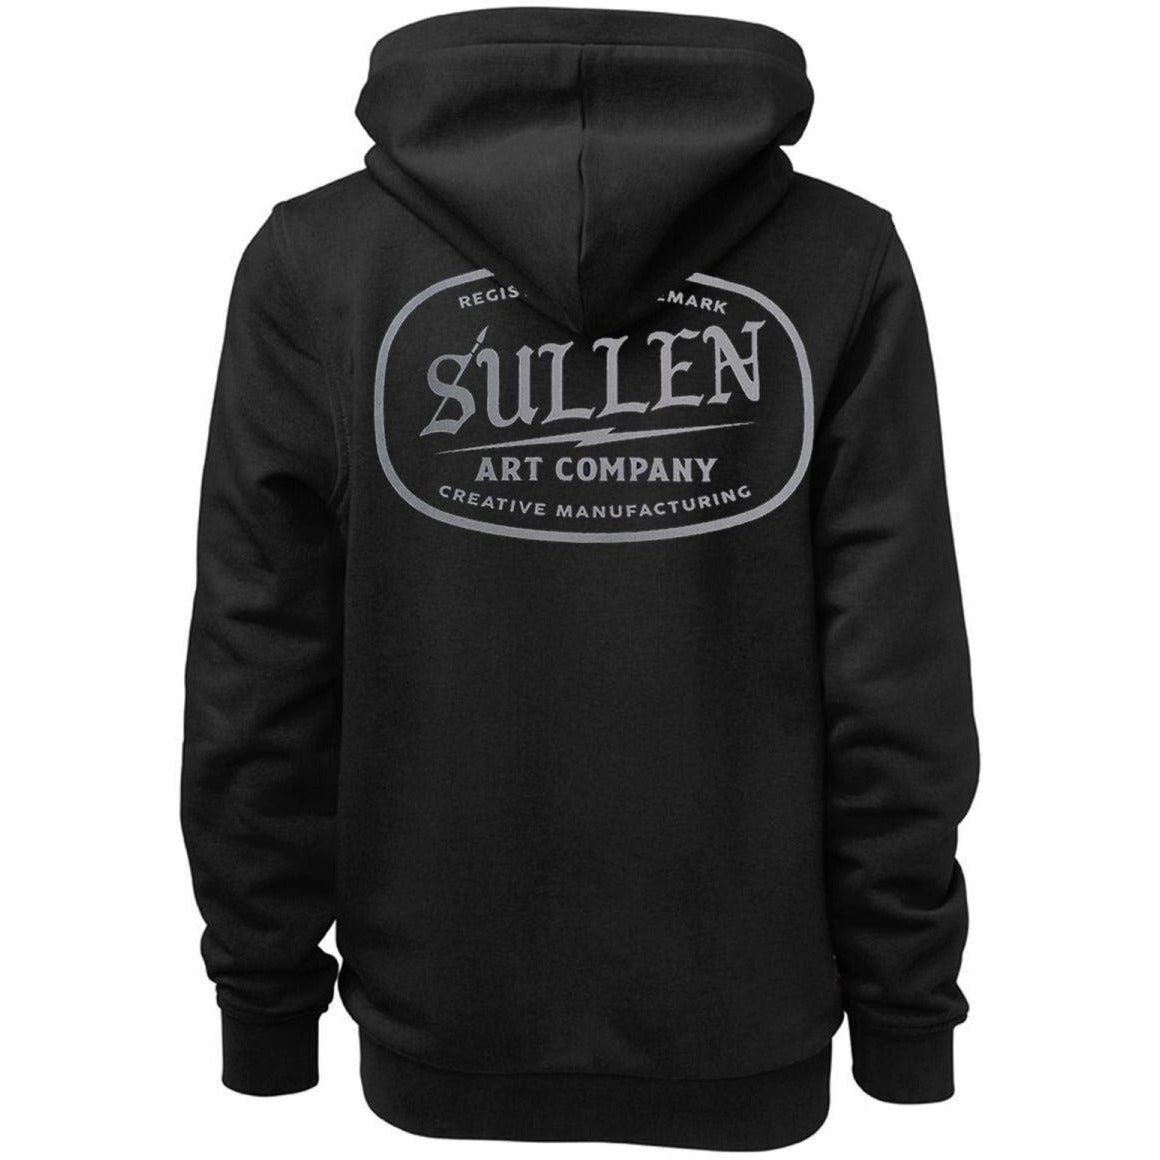 SULLEN-ART-COLLECTIVE-ART-CO.-ZIP-UP - ZIP HOODIE - Synik Clothing - synikclothing.com